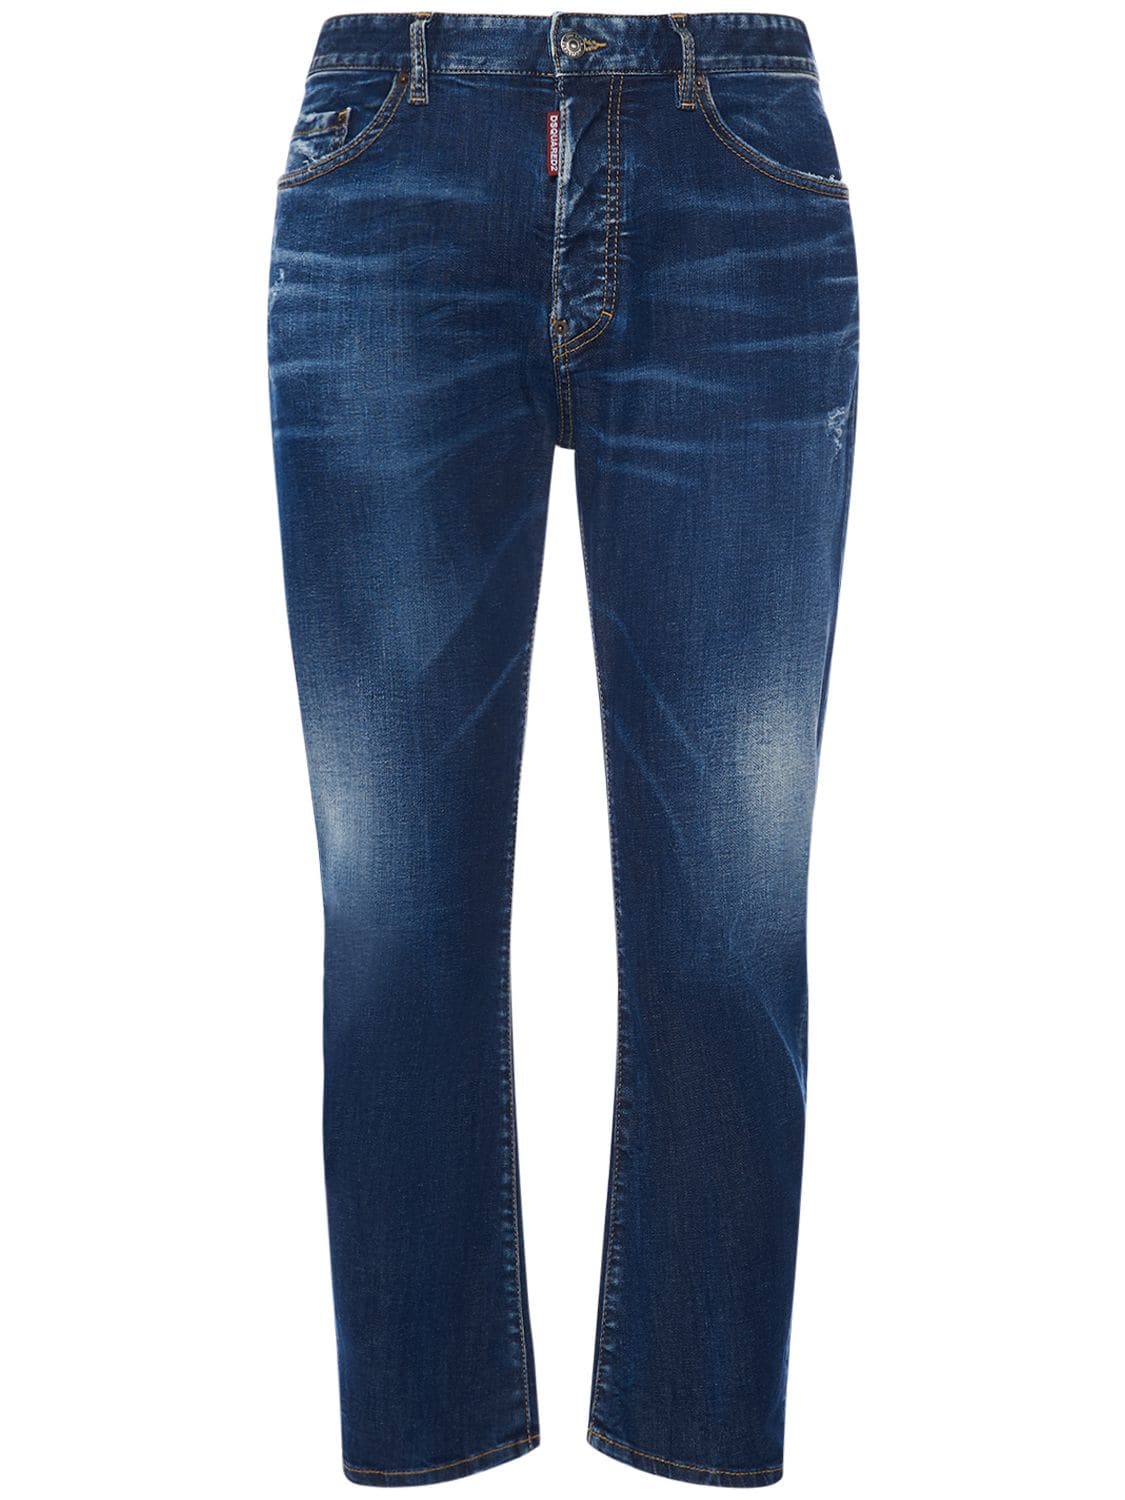 Dsquared2 Bro Stretch Cotton Denim Jeans In Navy Blue